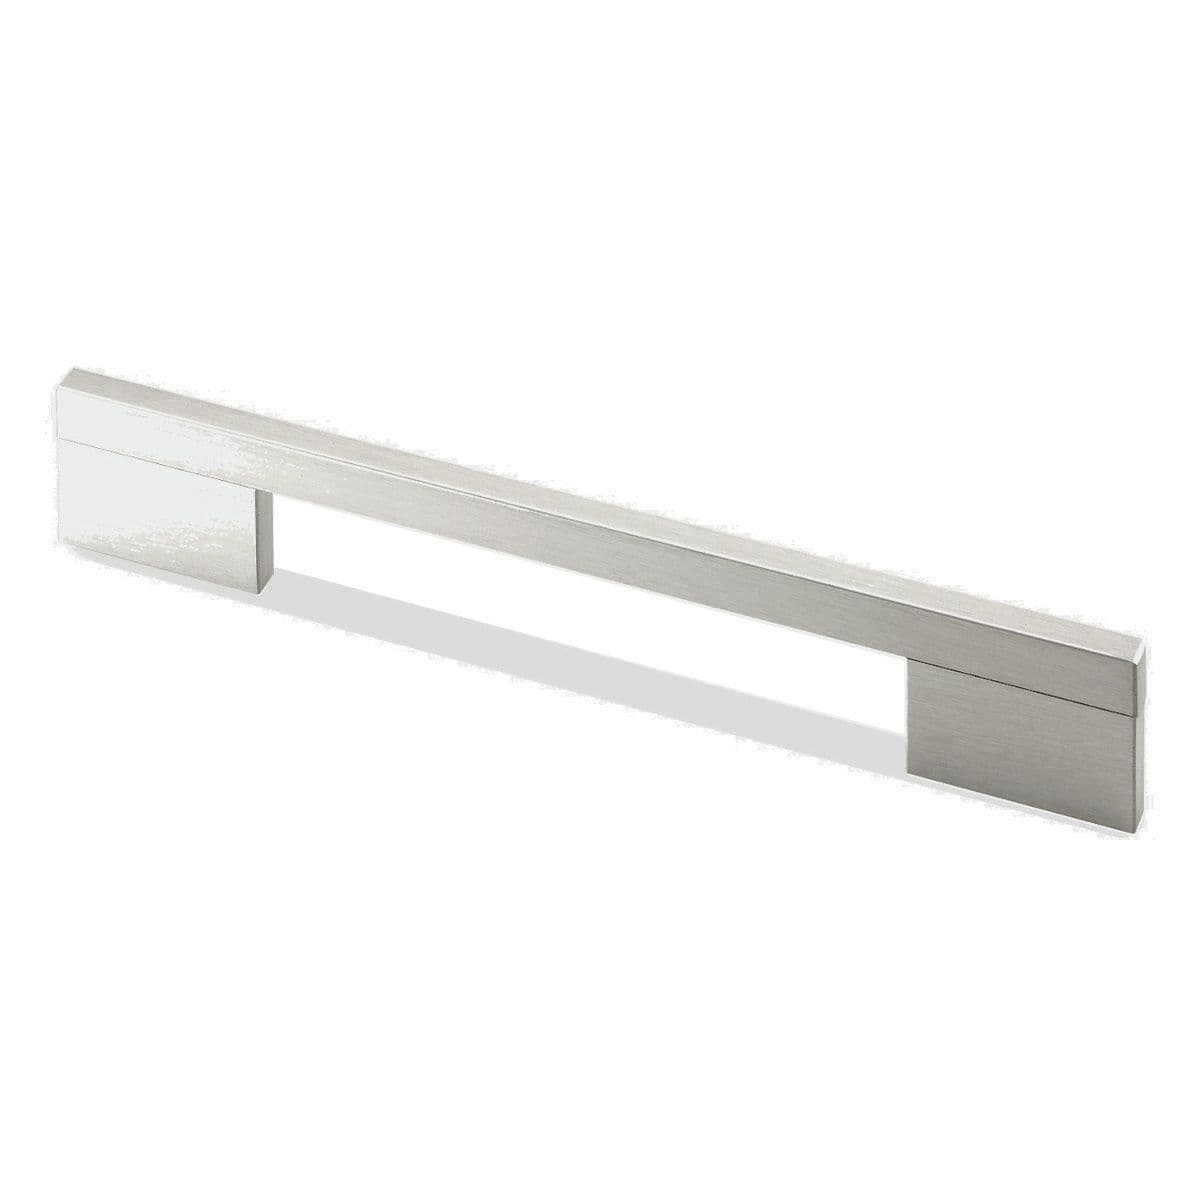 IMPERIA D Cupboard Handle - 5 sizes - BRUSHED STAINLESS STEEL LOOK (HETTICH - New Modern)